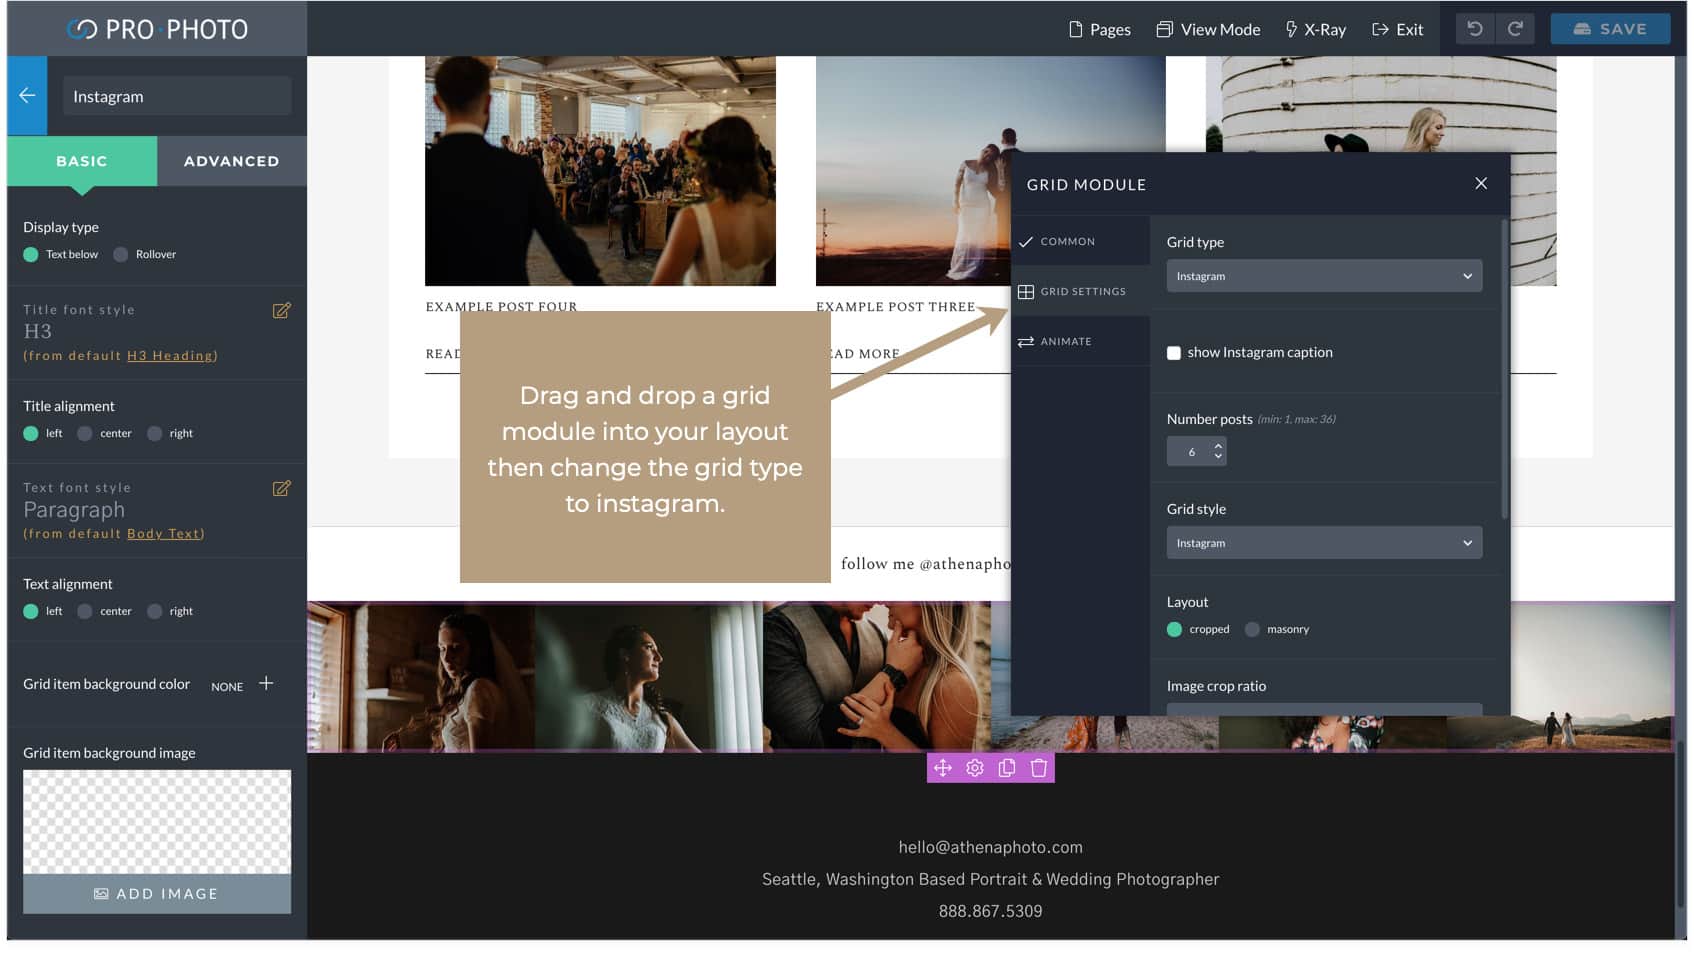 Drag and drop a grid module into your layout then change the grid type to instagram.